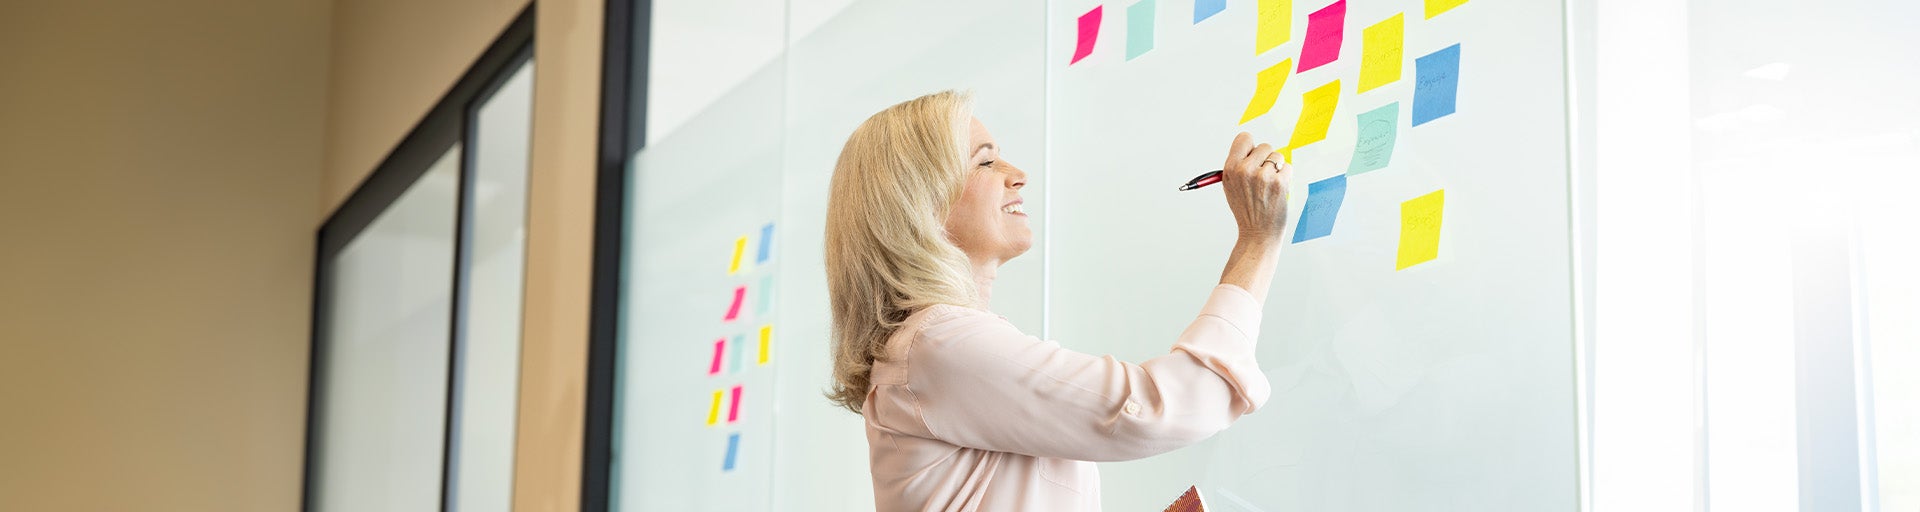 Woman writing on colorful post-it notes that are stuck to a opaque wall.